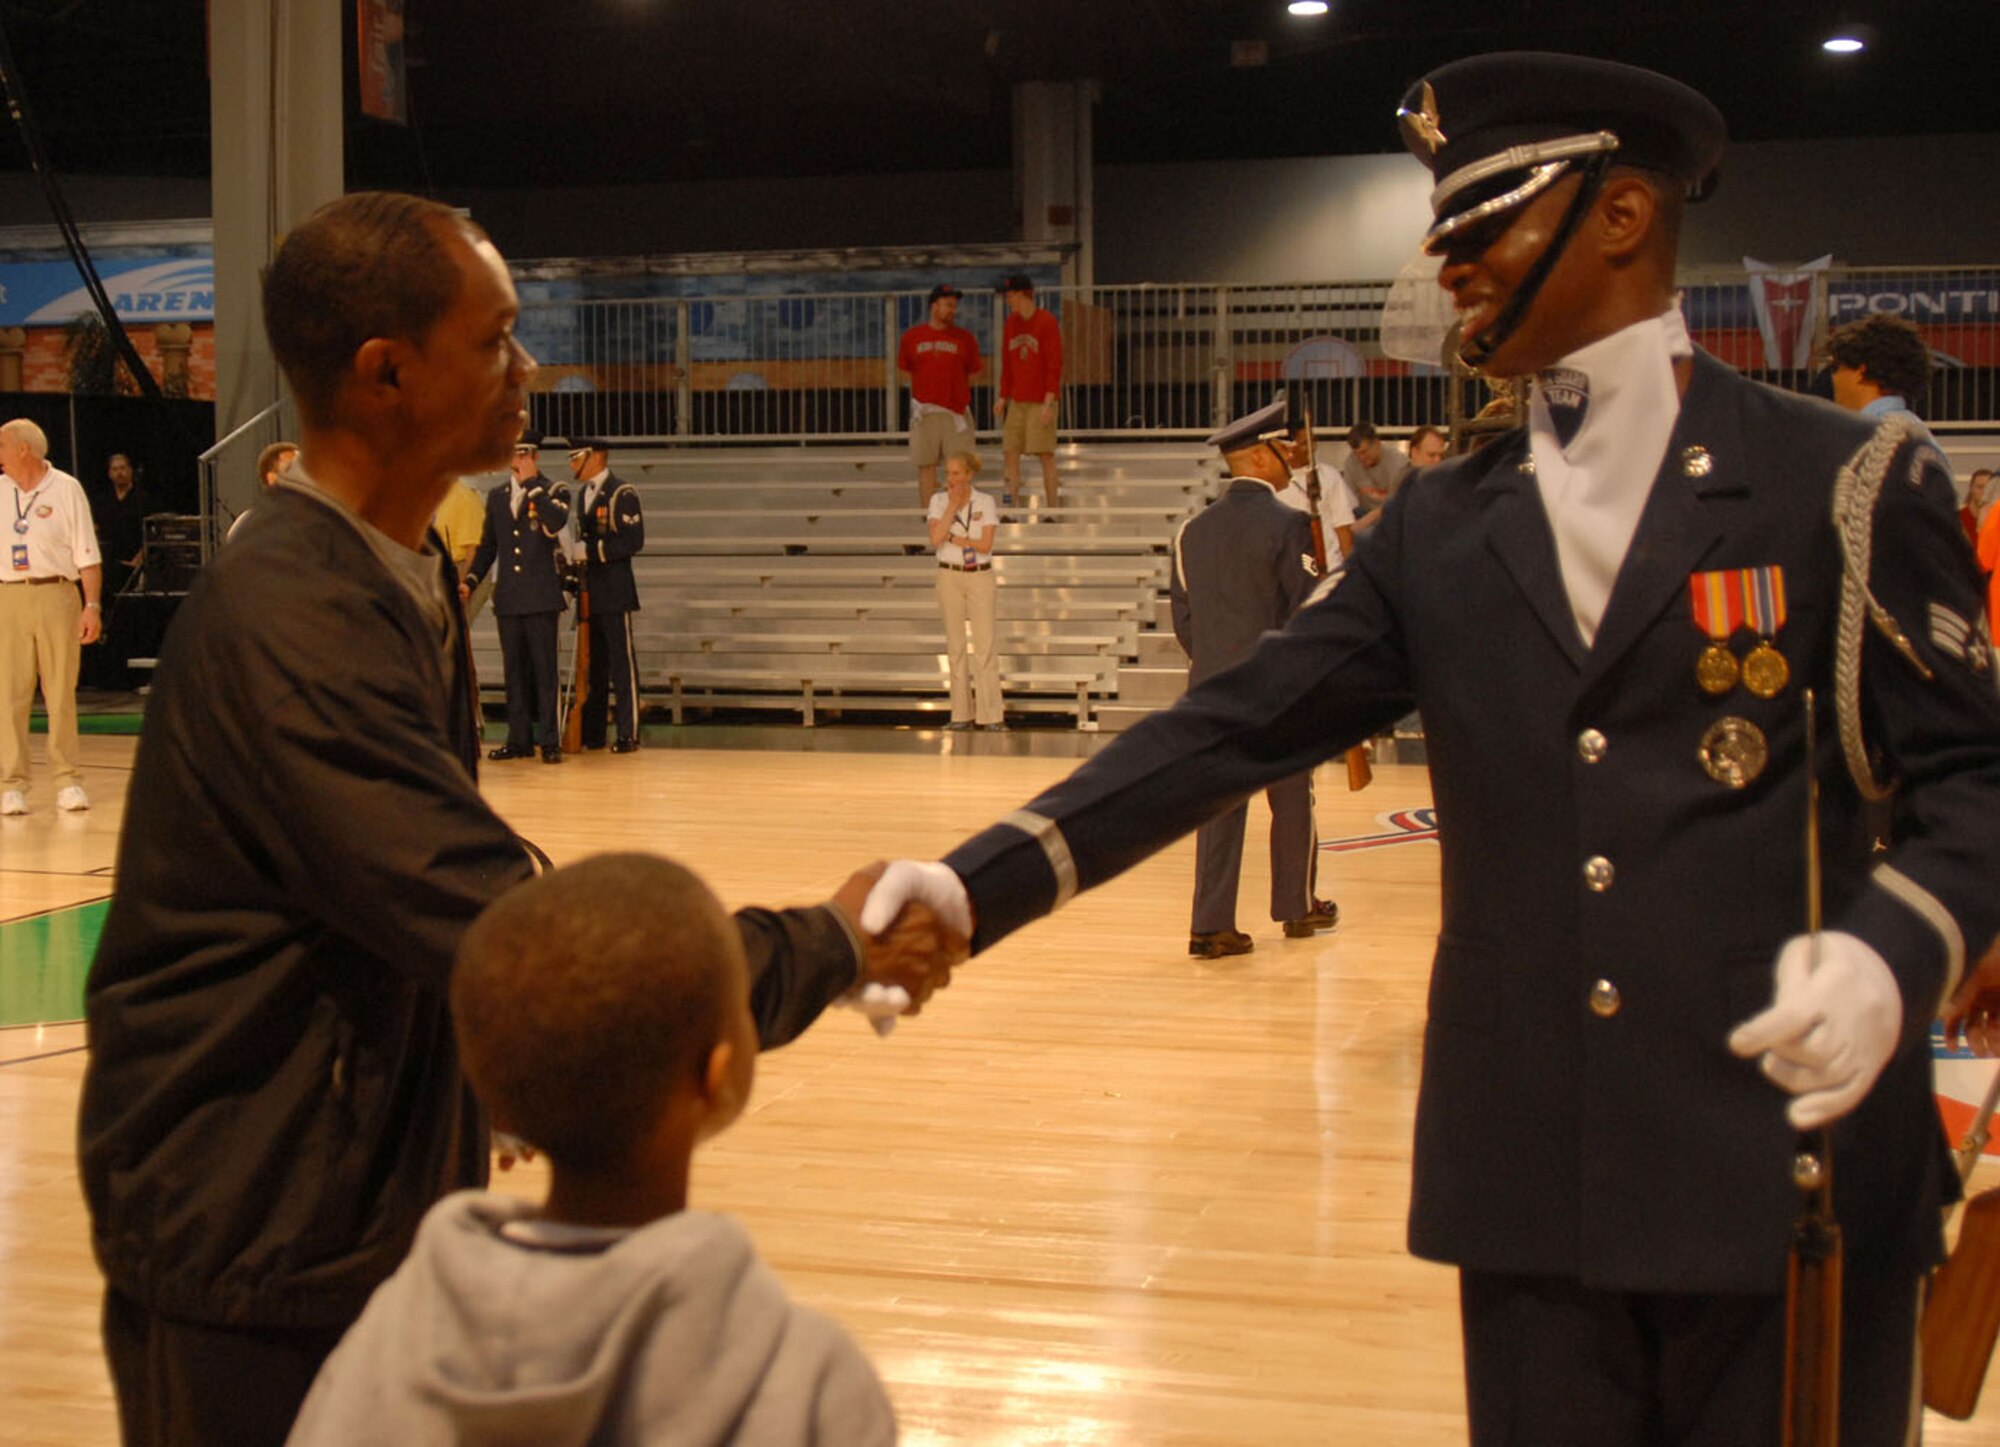 ATLANTA, Ga -- Senior Airman Michael Jiggets, United States Air Force Honor Guard Drill Team member, speaks with basketball fans after the team's performance at Hoop City for the NCAA Final Four Tournament.  The Air Force Honor Guard Drill Team was invited to perform for various ceremonies associated with the NCAA Final Four events March 31 - April 2, including the opening ceremonies at Centennial Olympic Park March 31.